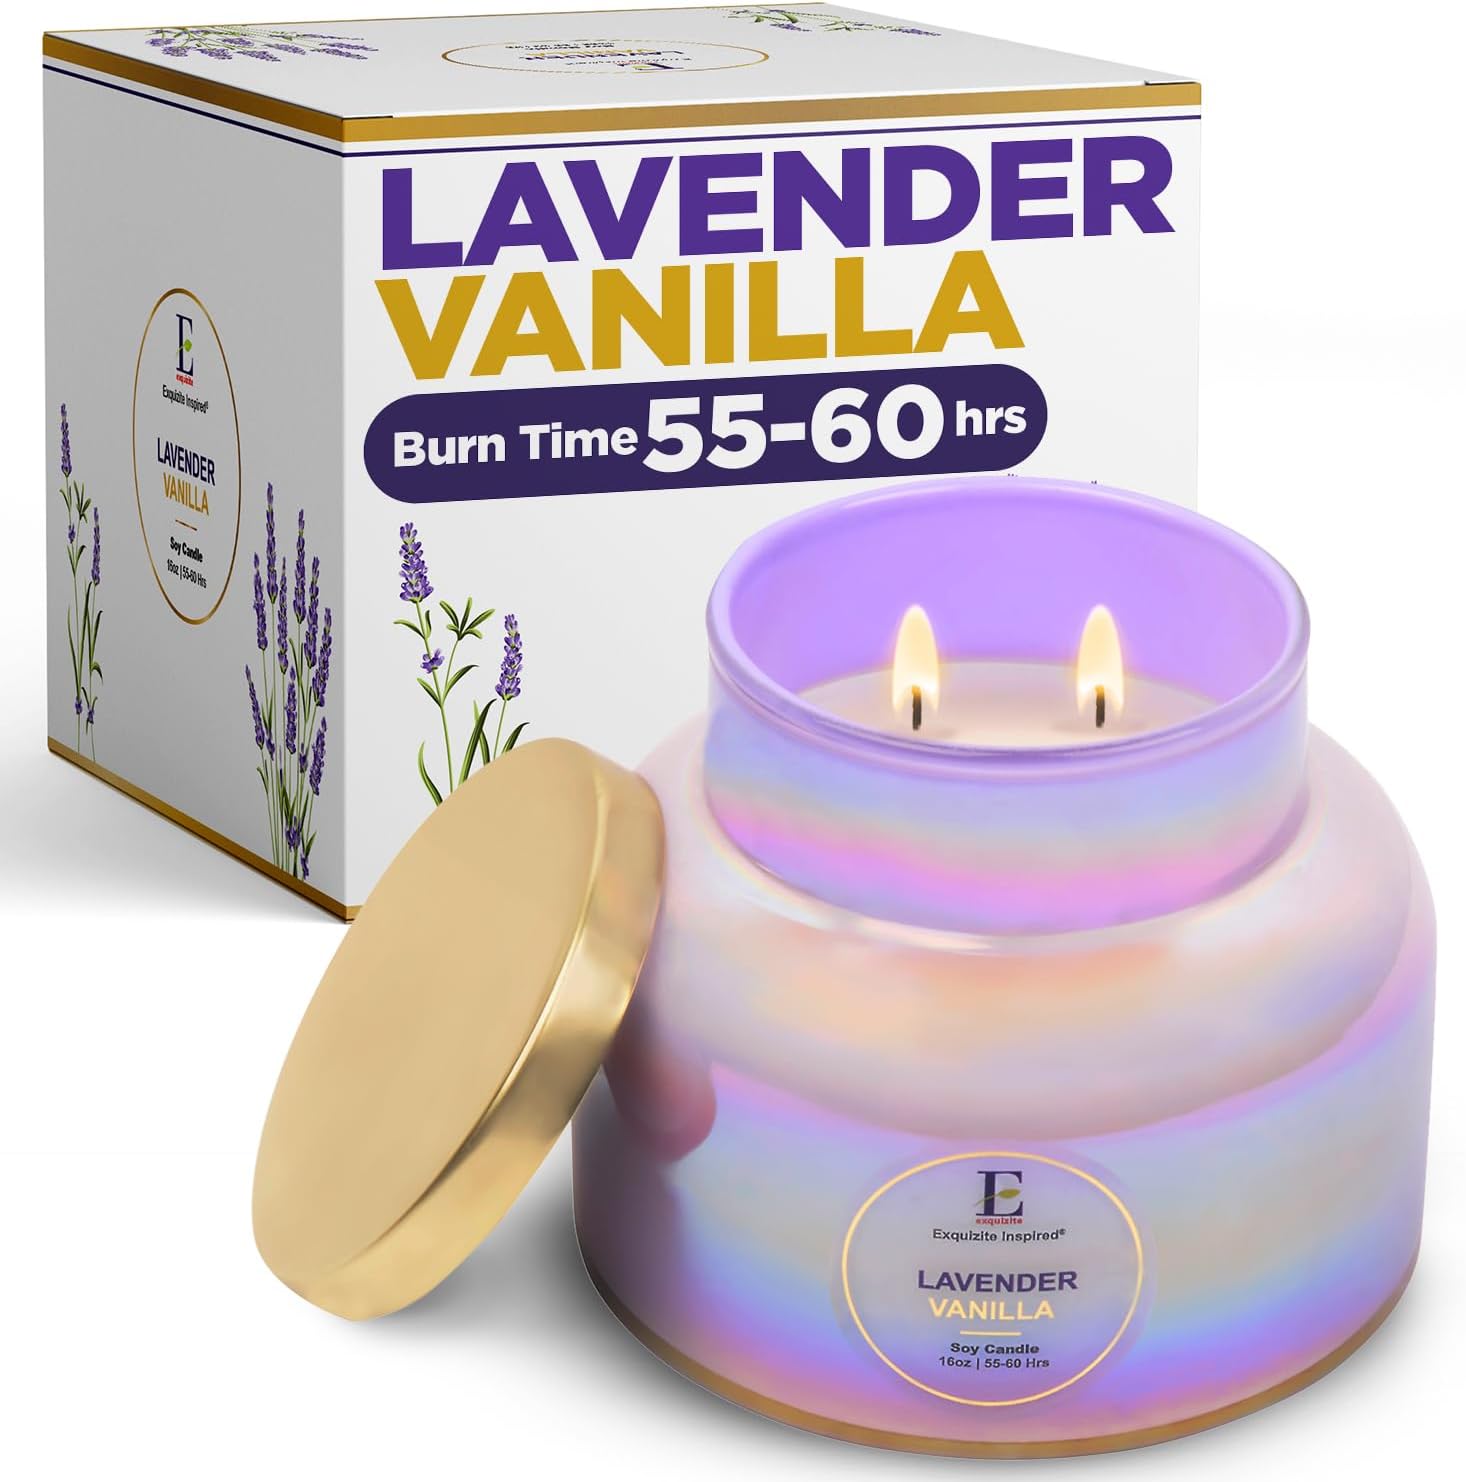 Lavender Vanilla Scented Candle Large - Candles for Home Scented - Soy Non Toxic Fall Candles Clearance for Home Scented Birthday Gifts for Women Housewarming Gifts for New House Highly Scented